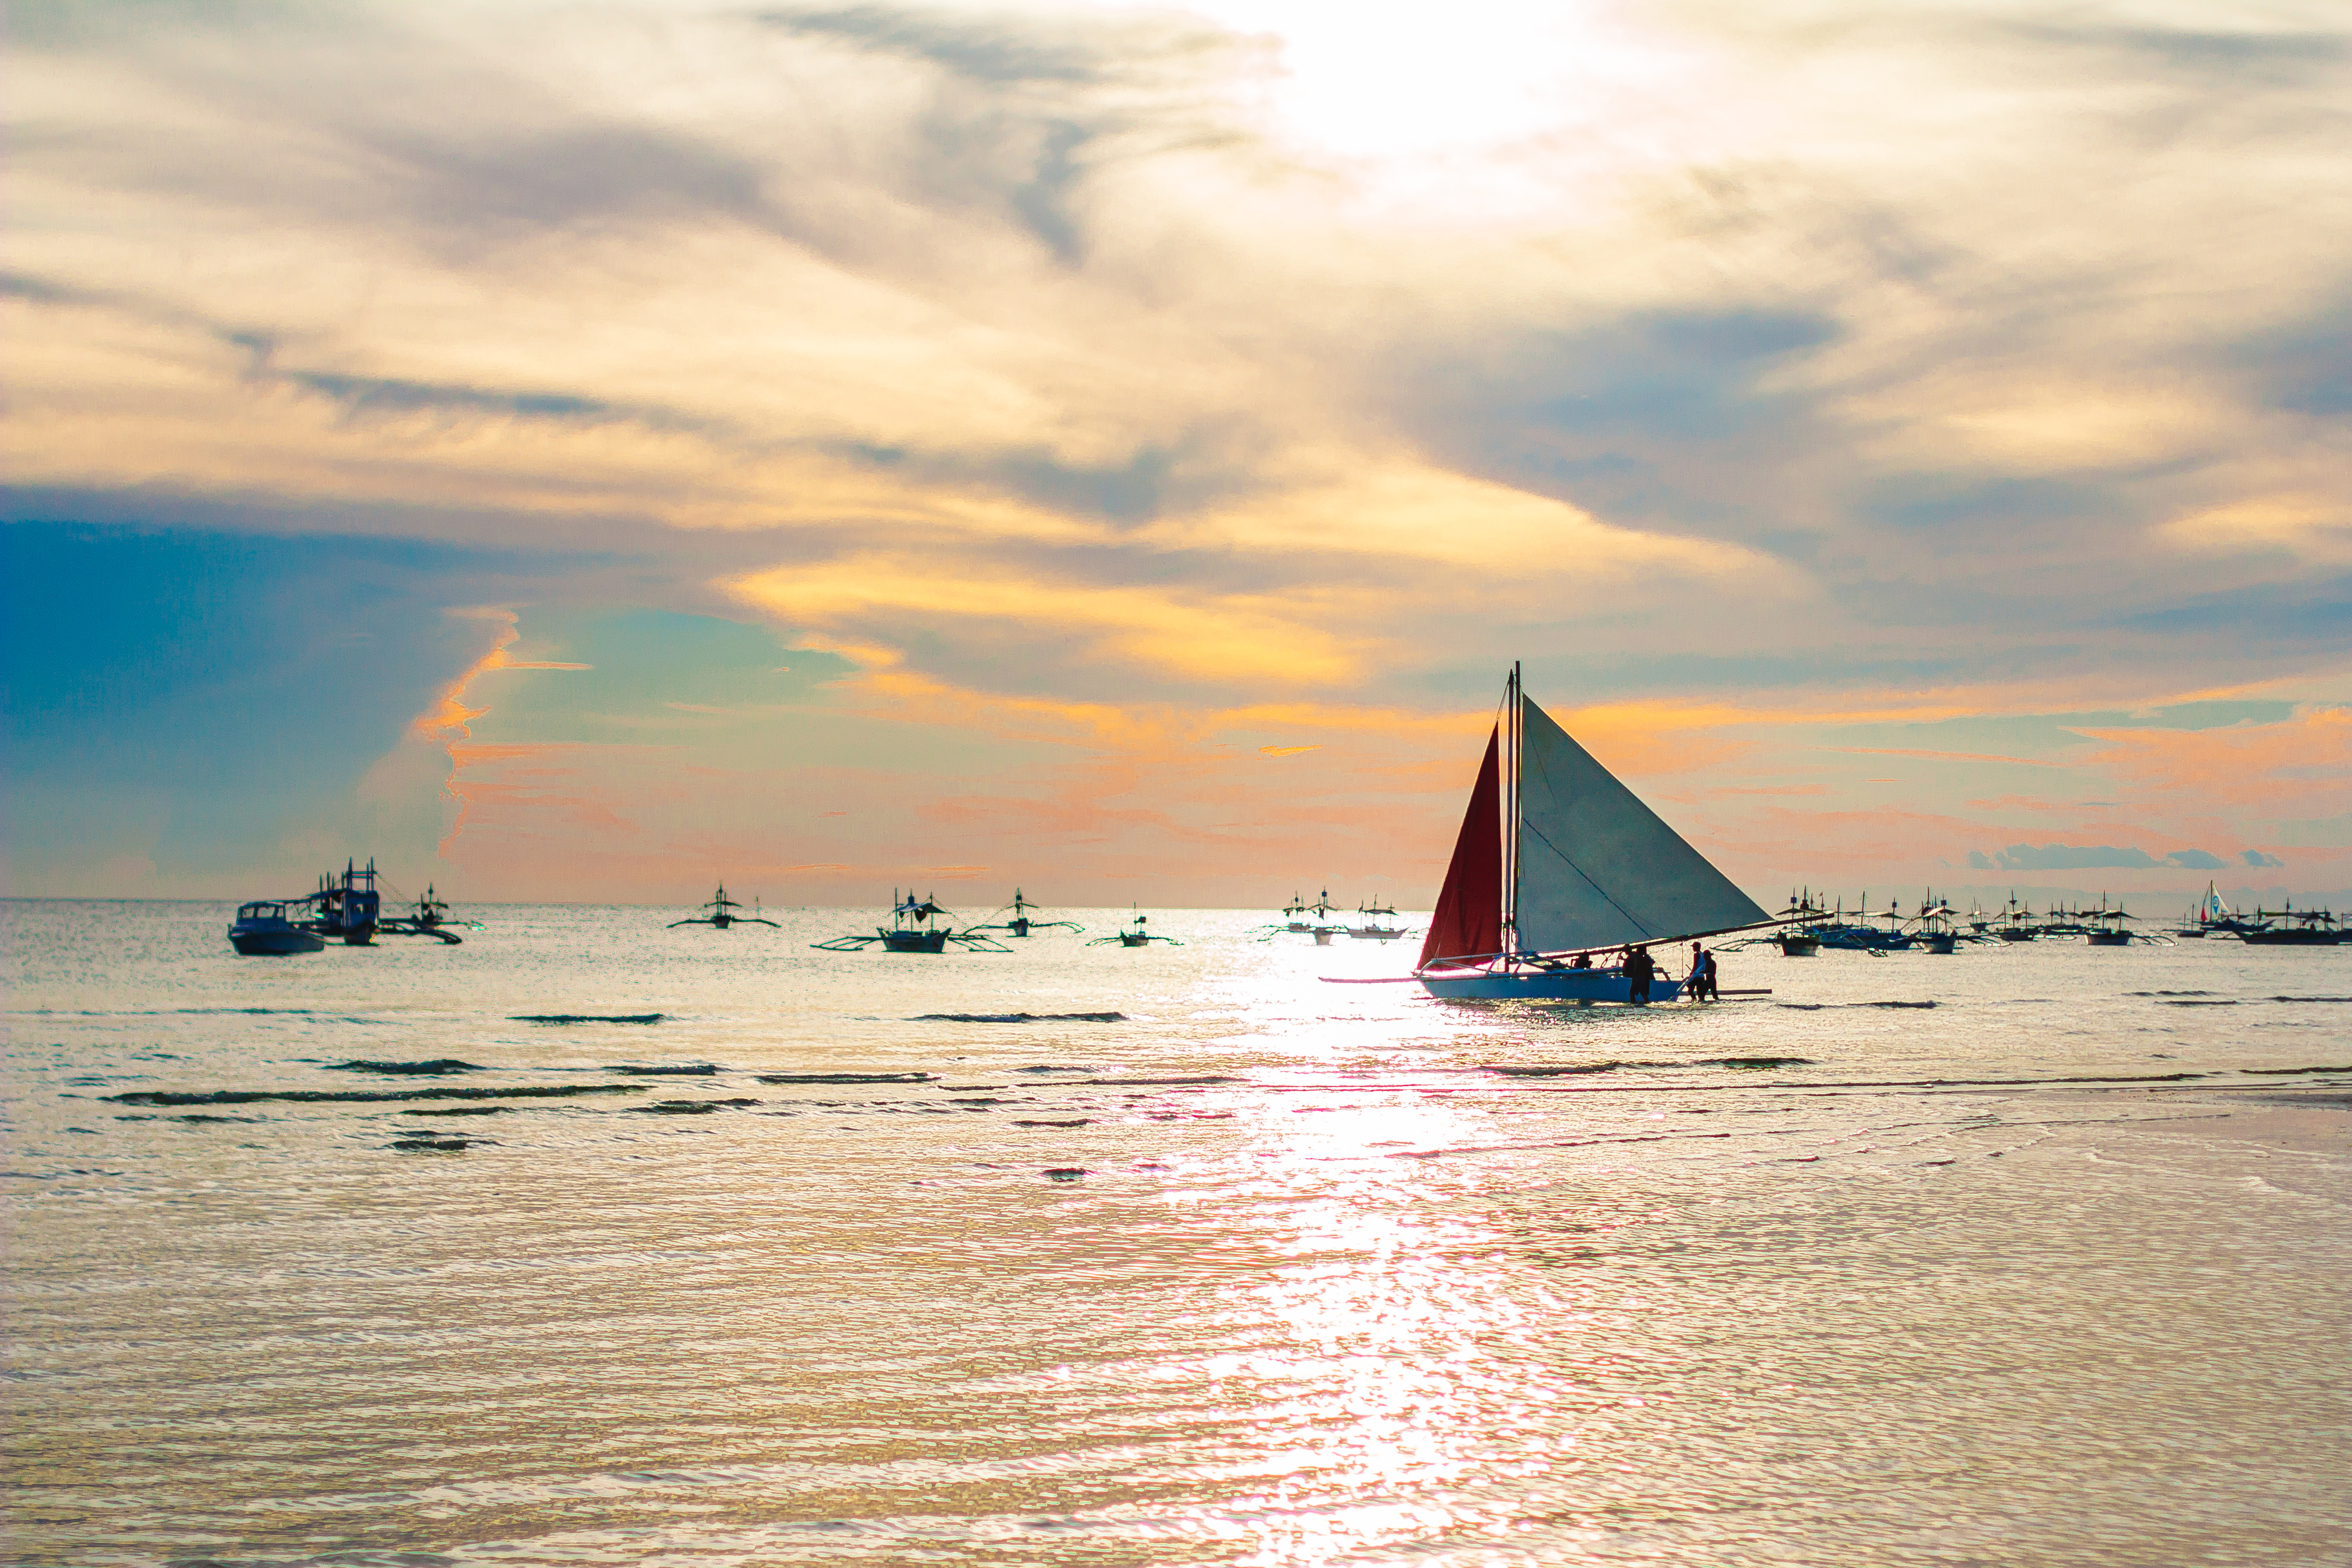 Sailing boat to the sunset in Boracay island